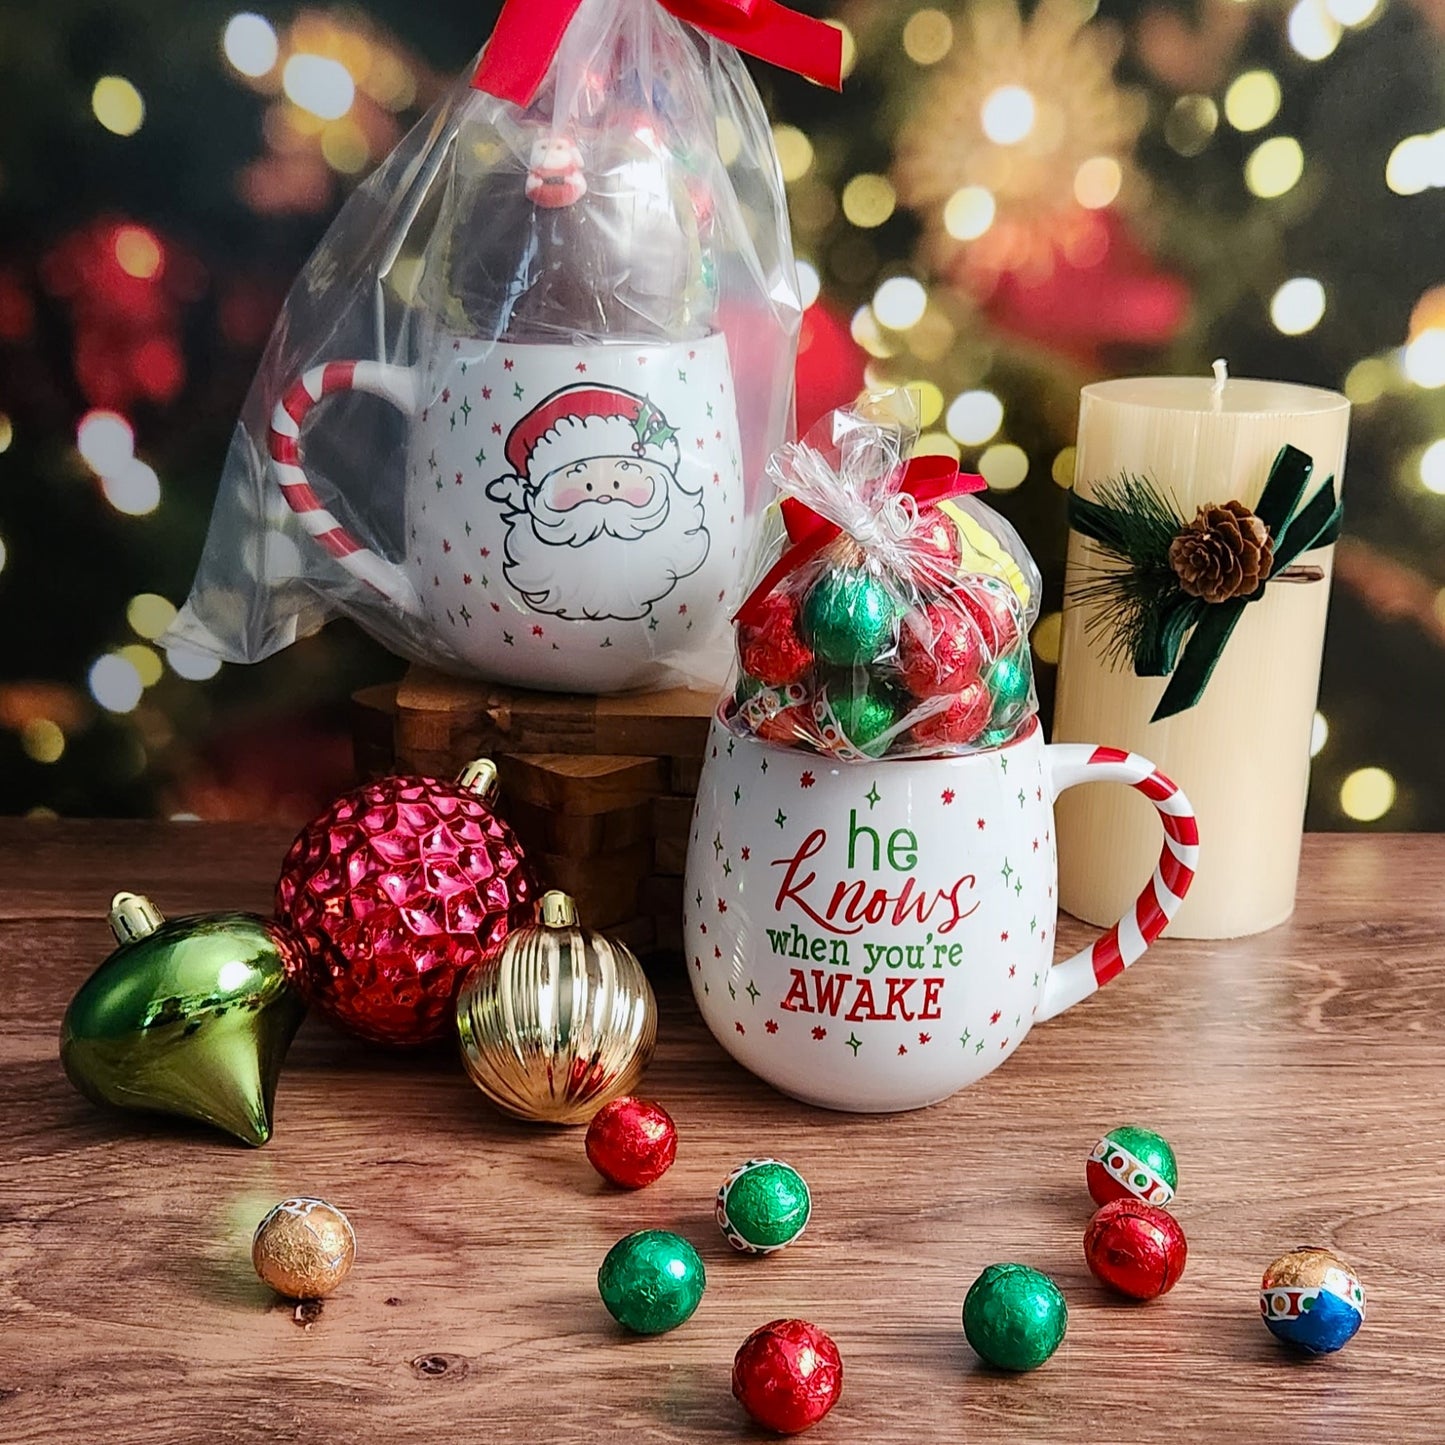 Embrace the holiday spirit with this Santa mug displaying a festive saying and indulge  in a Milk Chocolate Hot Cocoa Bomb and Milk Chocolate Foiled Ornaments